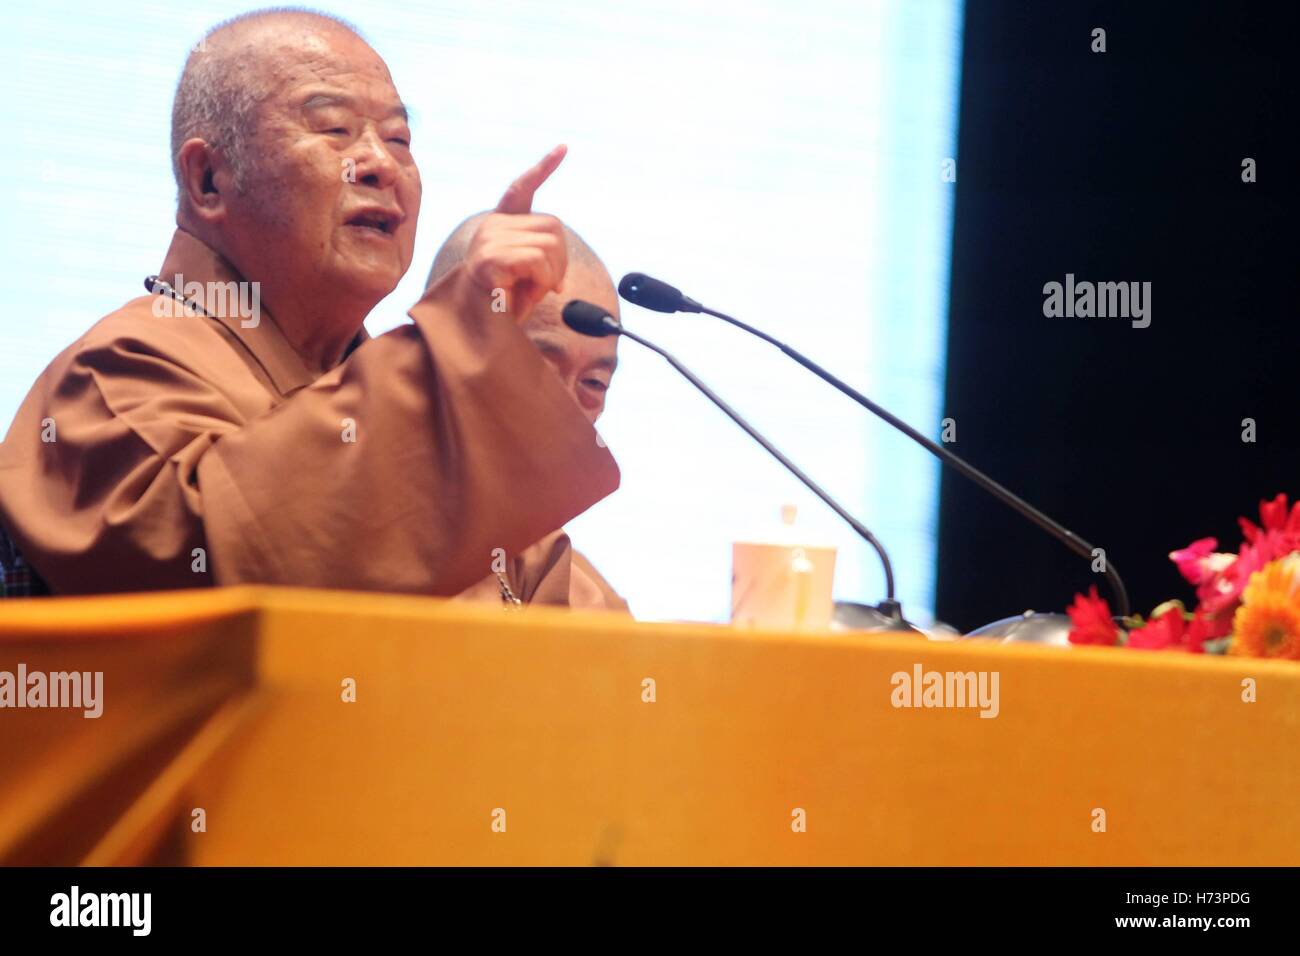 Binzhou, Binzhou, China. 9th June, 2014. Binzhou, CHINA-June 9 2004: (EDITORIAL USE ONLY. CHINA OUT) Master Xingyun, gives a speech on Buddhism in Binzhou, east China's Shandong Province, June 9th, 2014. According to latest news, Master Xingyun suffered from a cerebral stroke recently. Now he is under stable recovery. Master Xingyun is a senior Buddhist priest and head of the Taiwan Buddhist delegation, winning respects from lots of people. © SIPA Asia/ZUMA Wire/Alamy Live News Stock Photo